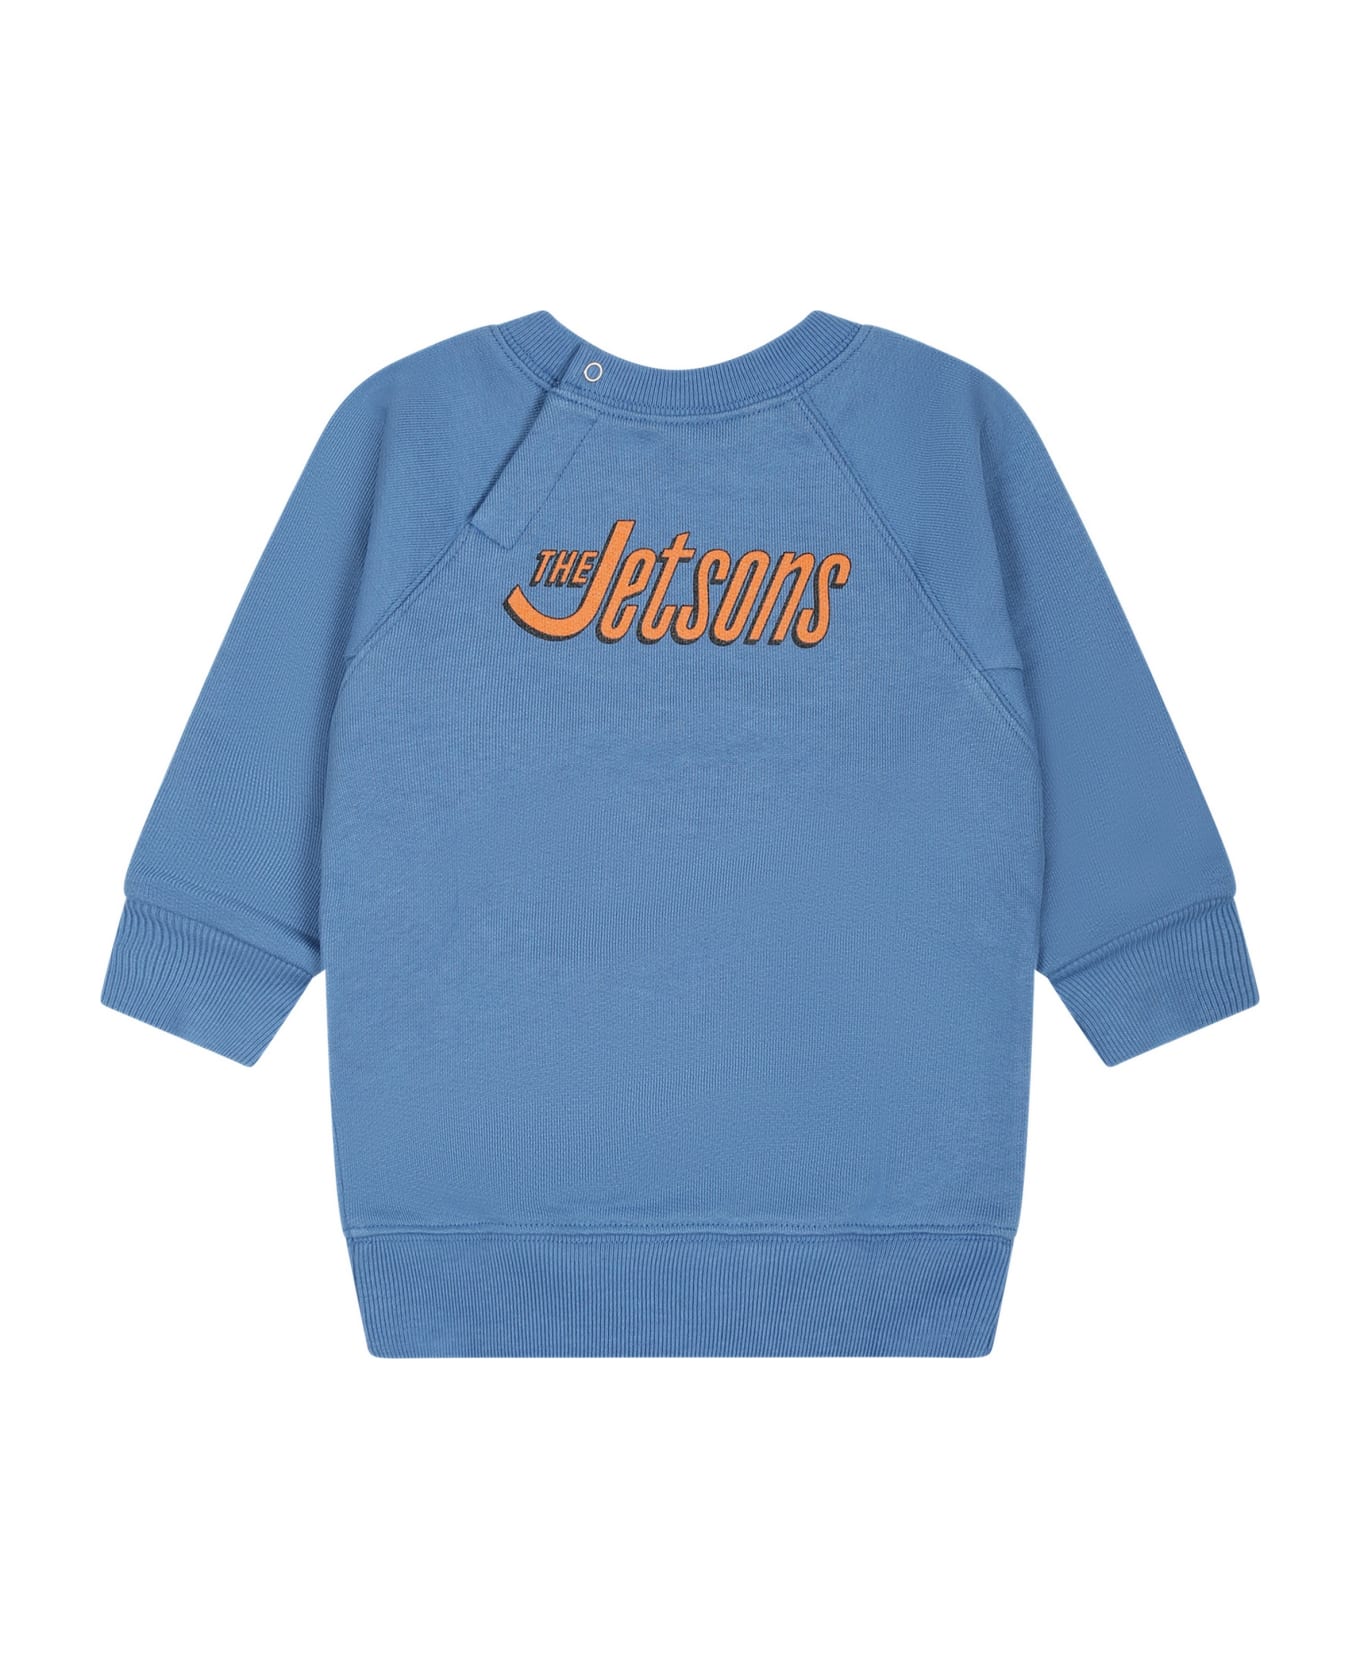 Gucci Light Blue Sweatshirt For Baby Kids With Print And Logo - Light Blue